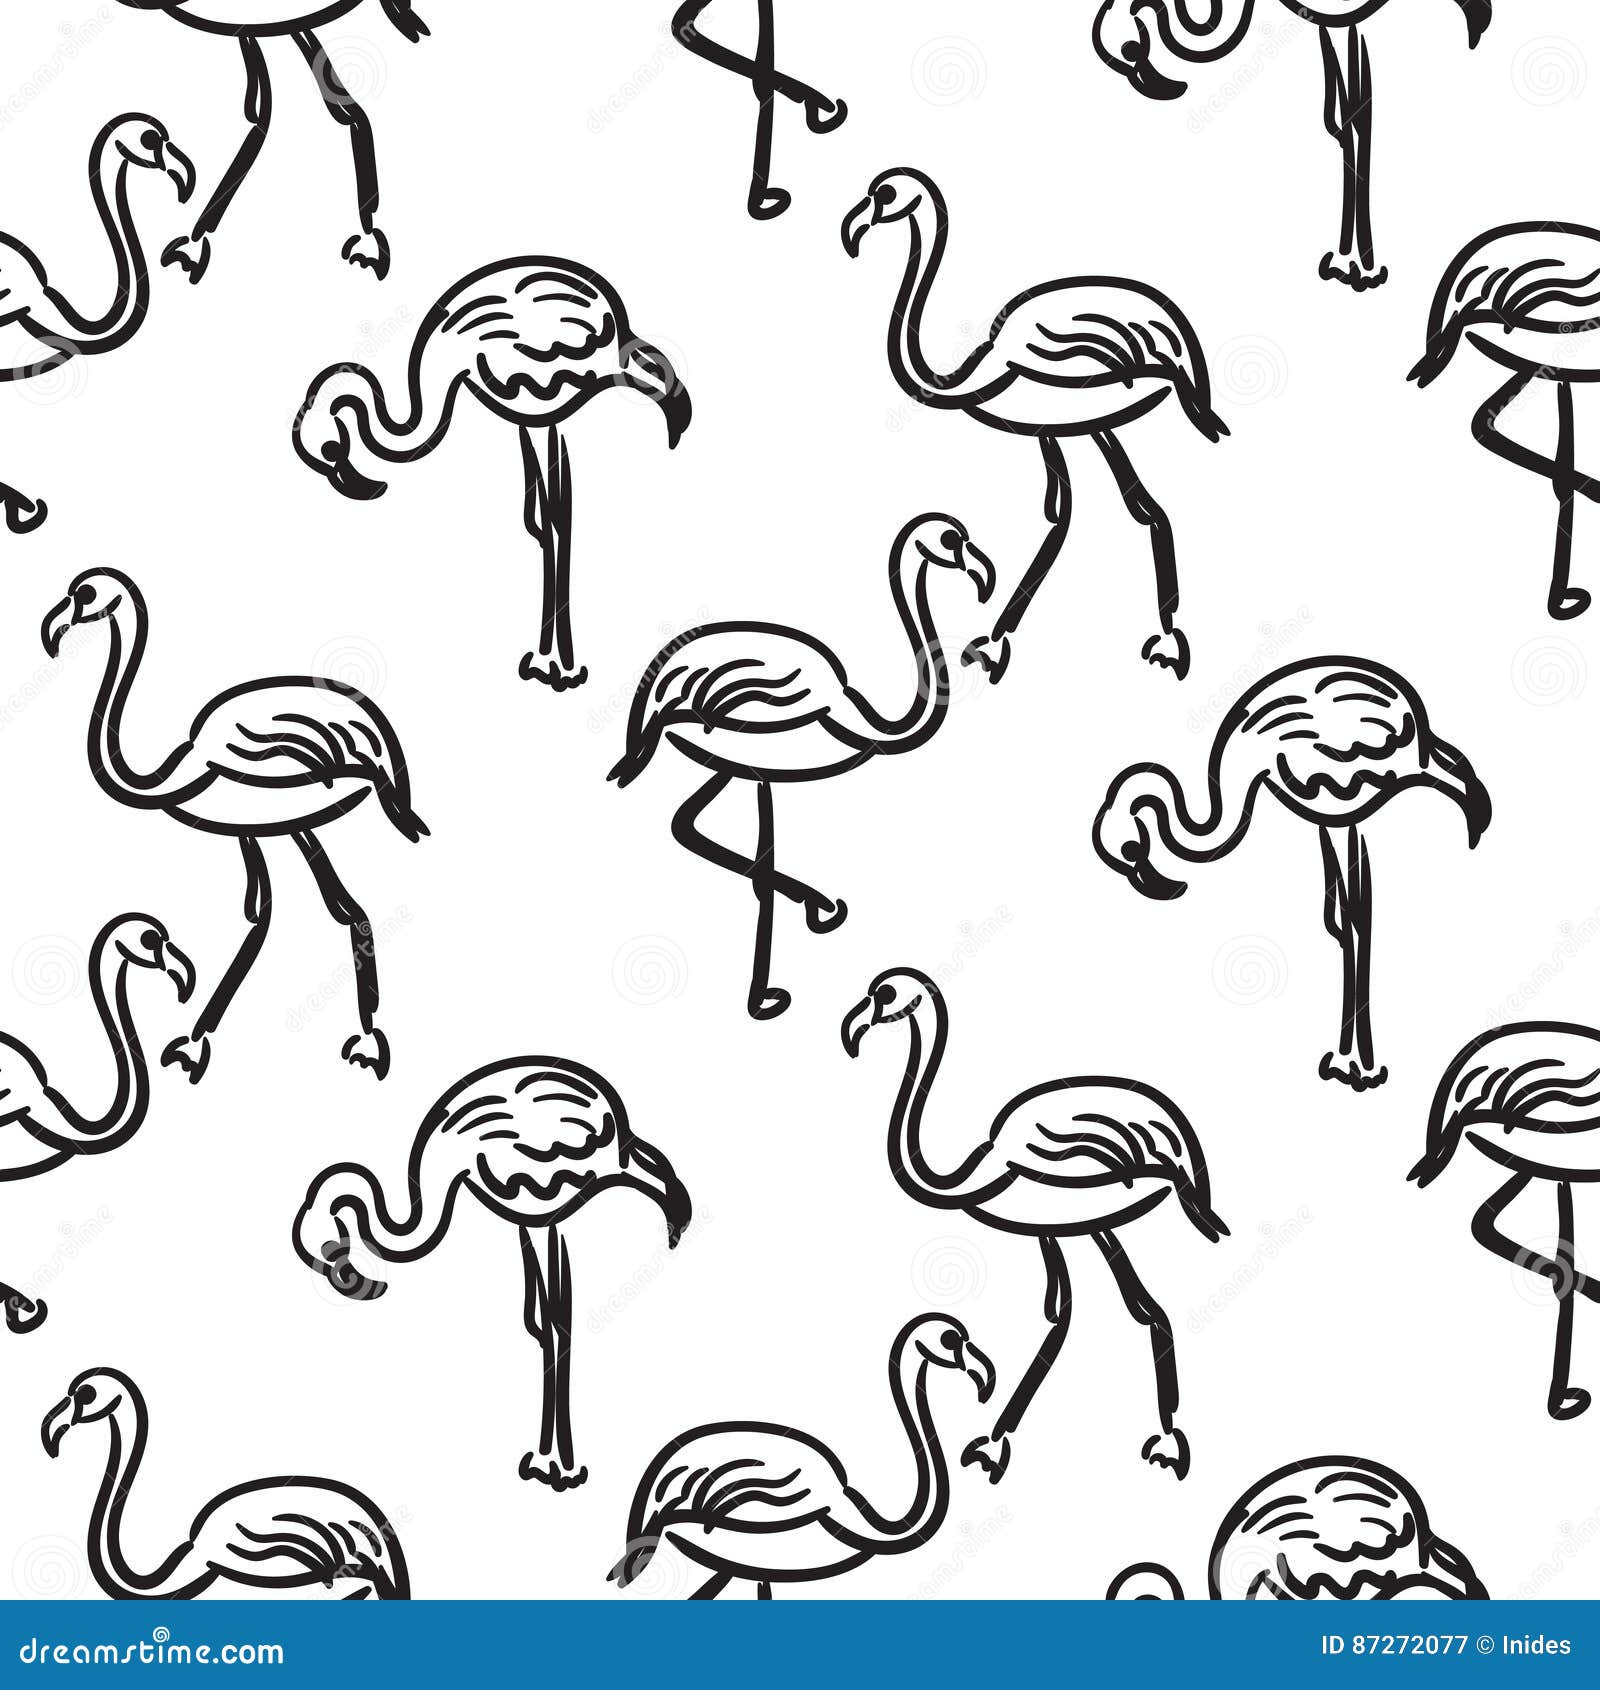 Flamingo black outline sketch seamless vector texture. Black and white aloha bird hand drawn surface pattern.